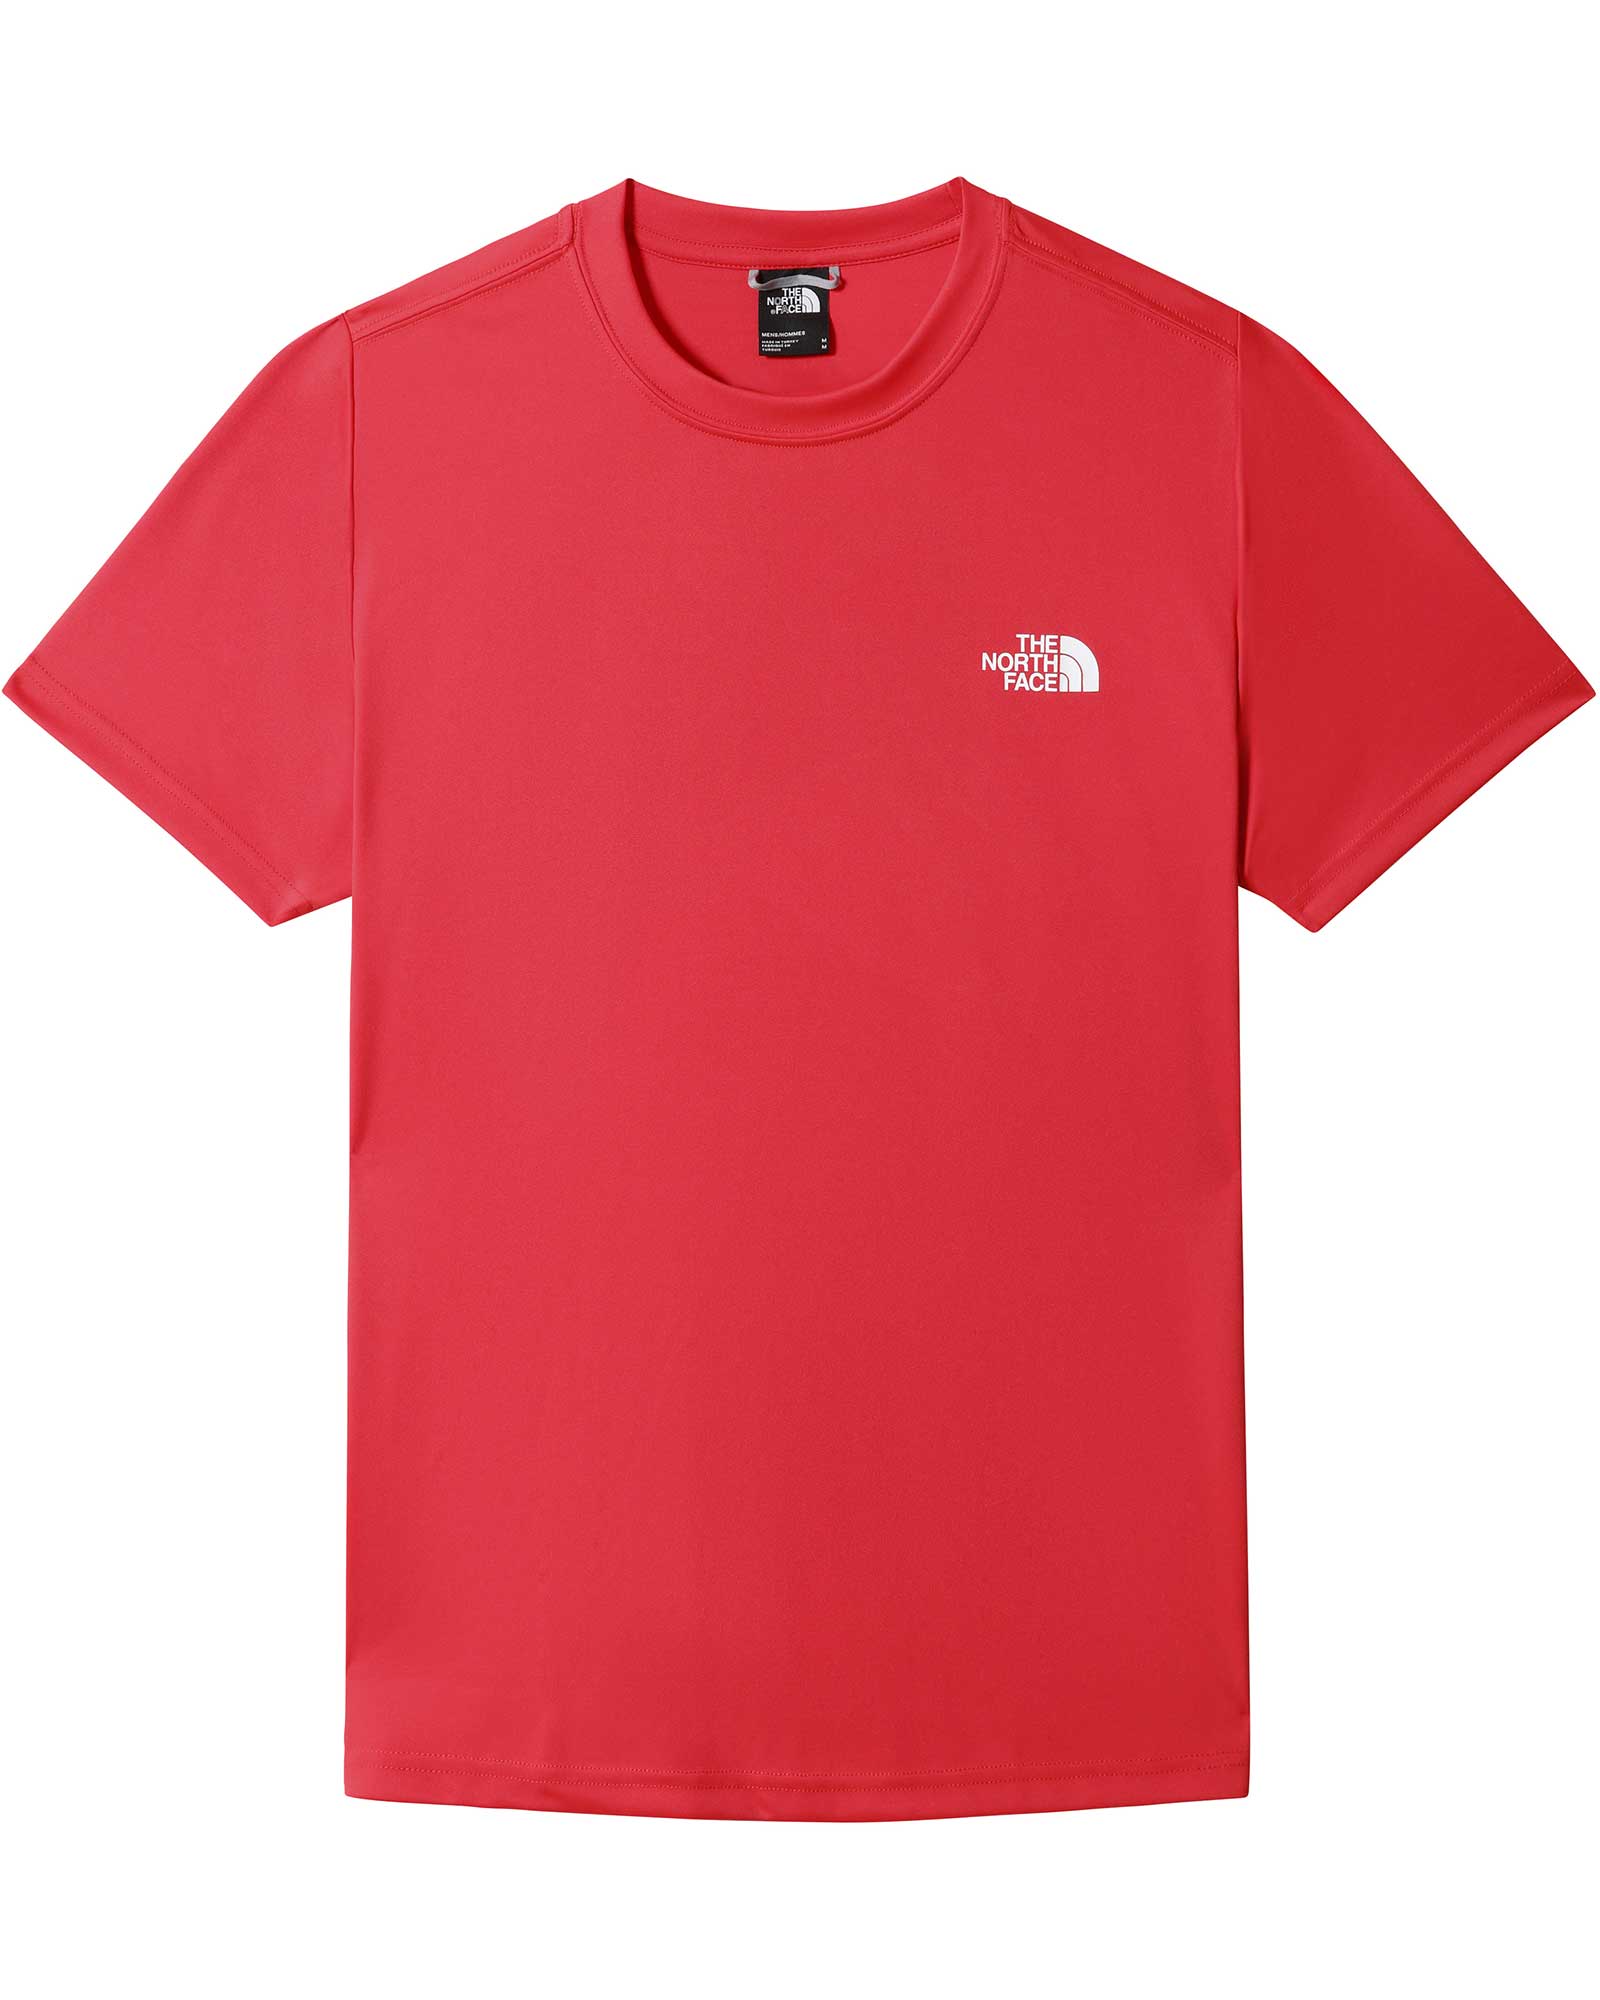 The North Face Reaxion Red Box Men’s T Shirt - Horizon Red XL